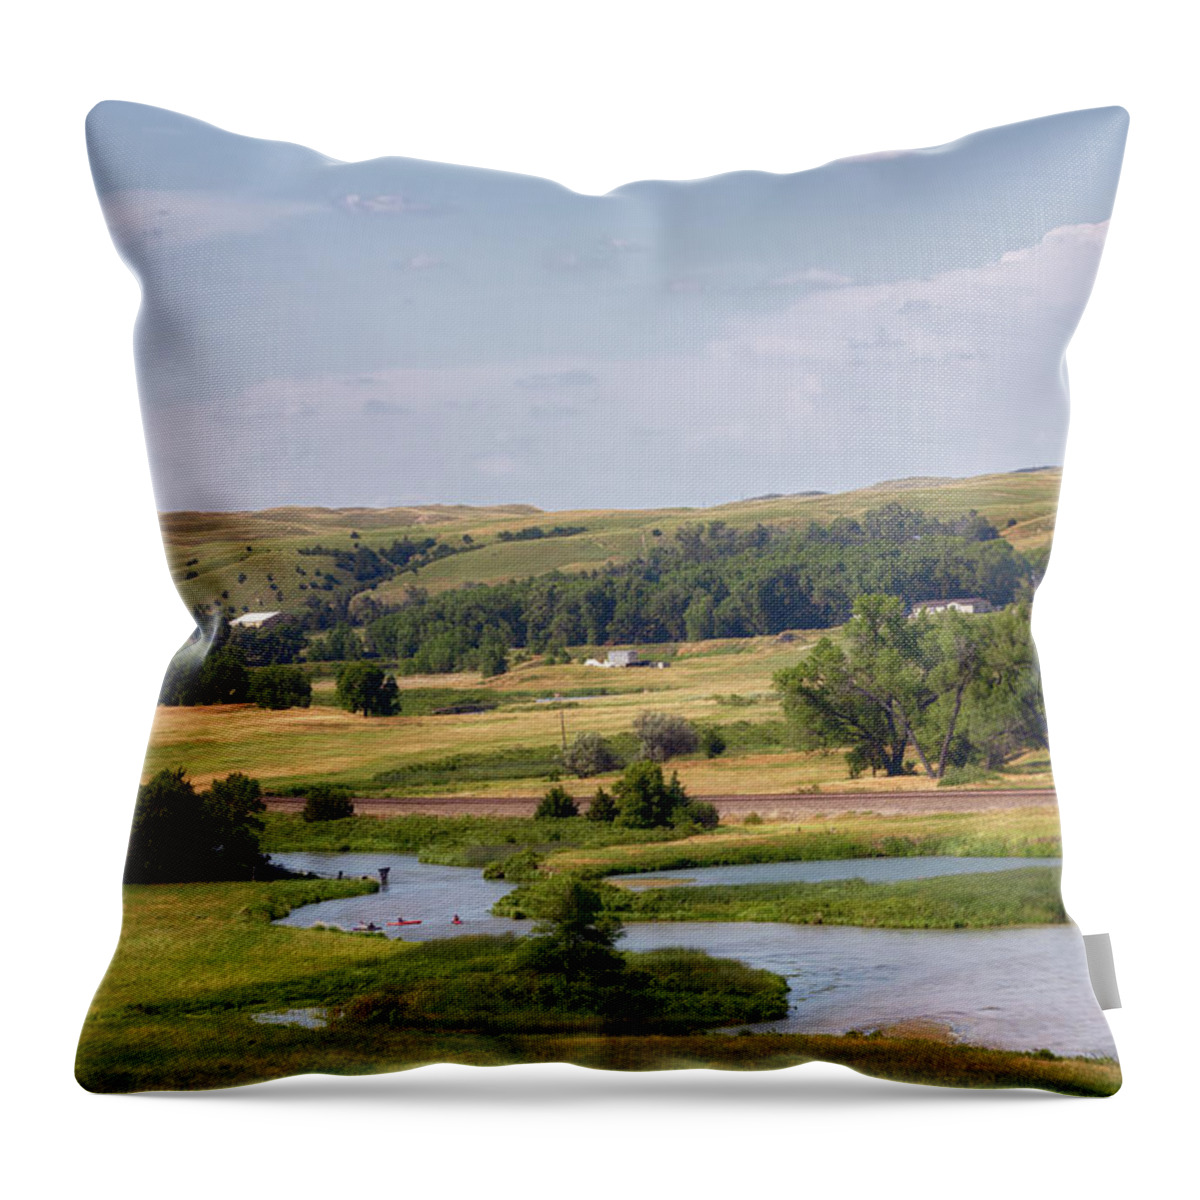 Nebraska Sandhills Throw Pillow featuring the photograph Middle Loup River - Sandhills Journey by Susan Rissi Tregoning